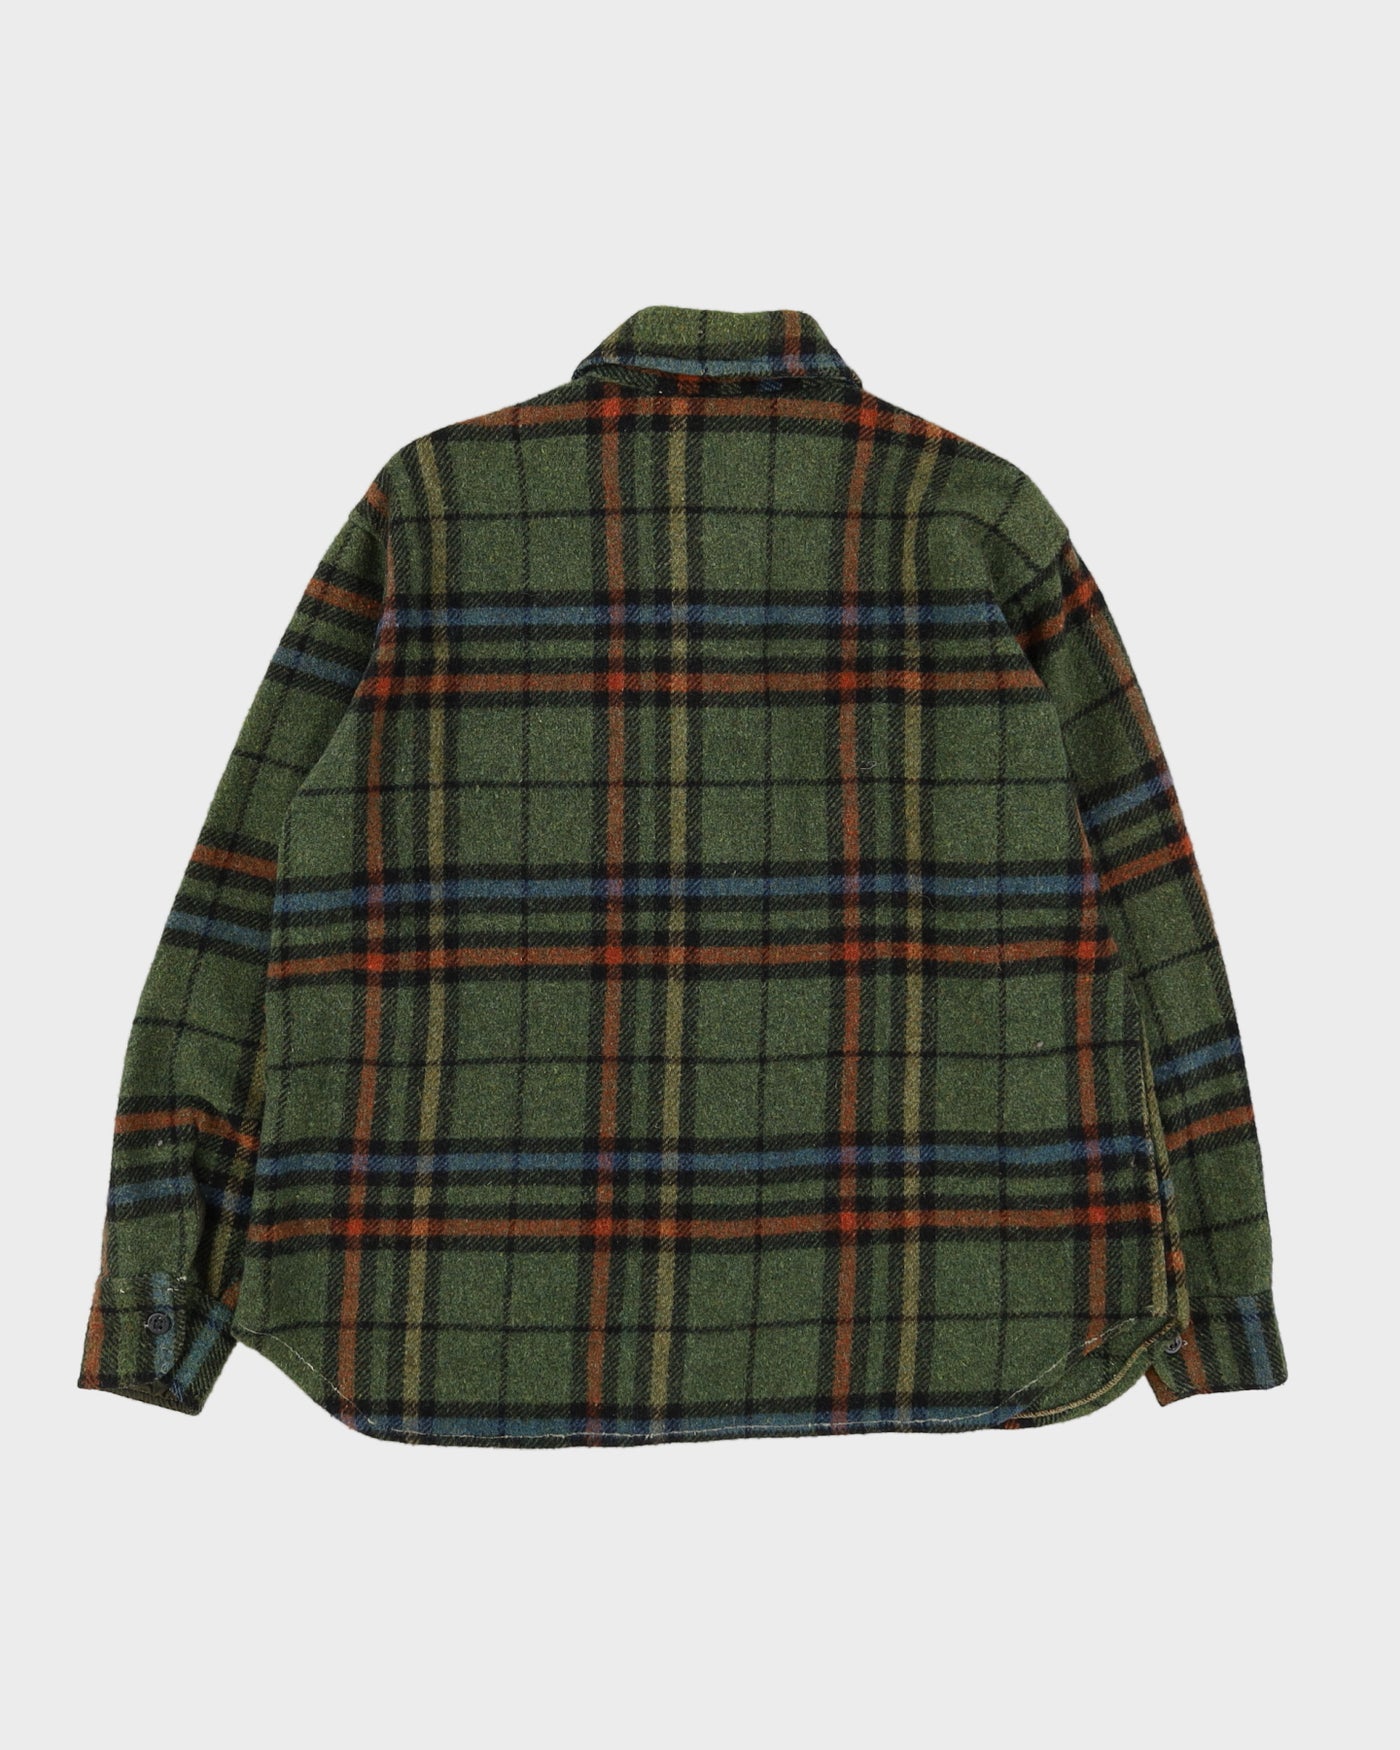 Vintage 70s Green Check Flannel Shirt - L